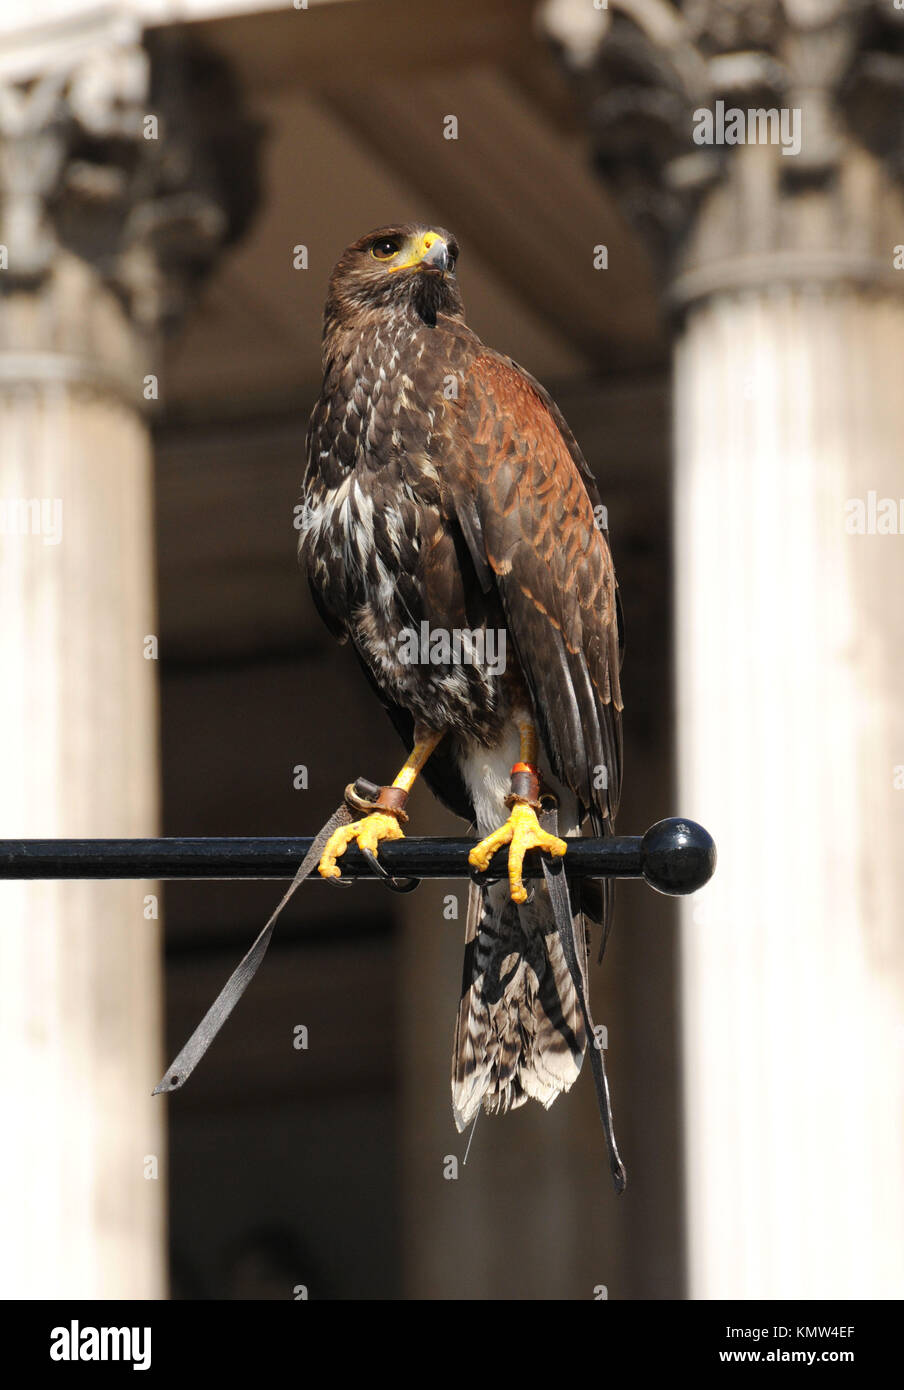 A harris hawk in Trafalgar Square on April 7, 2011 in London, England. Photo by Barry King/Alamy Stock Photo Stock Photo